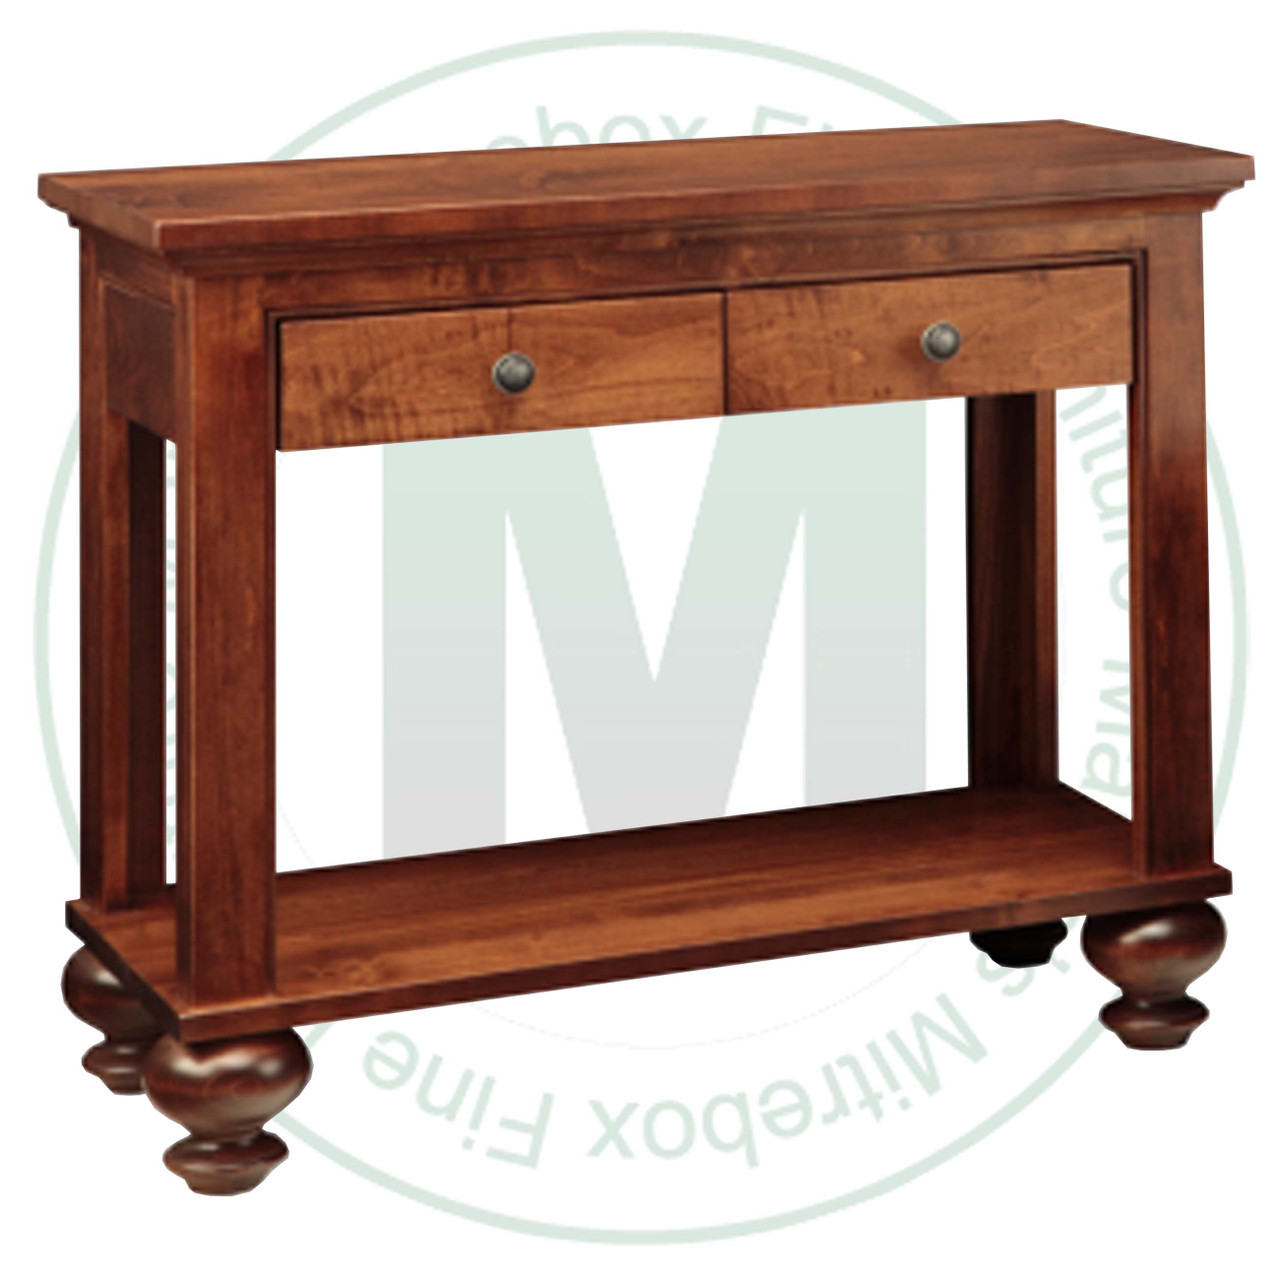 Maple Georgetown Sofa Table 16'' Deep x 35'' Wide x 30'' High With 2 Drawers